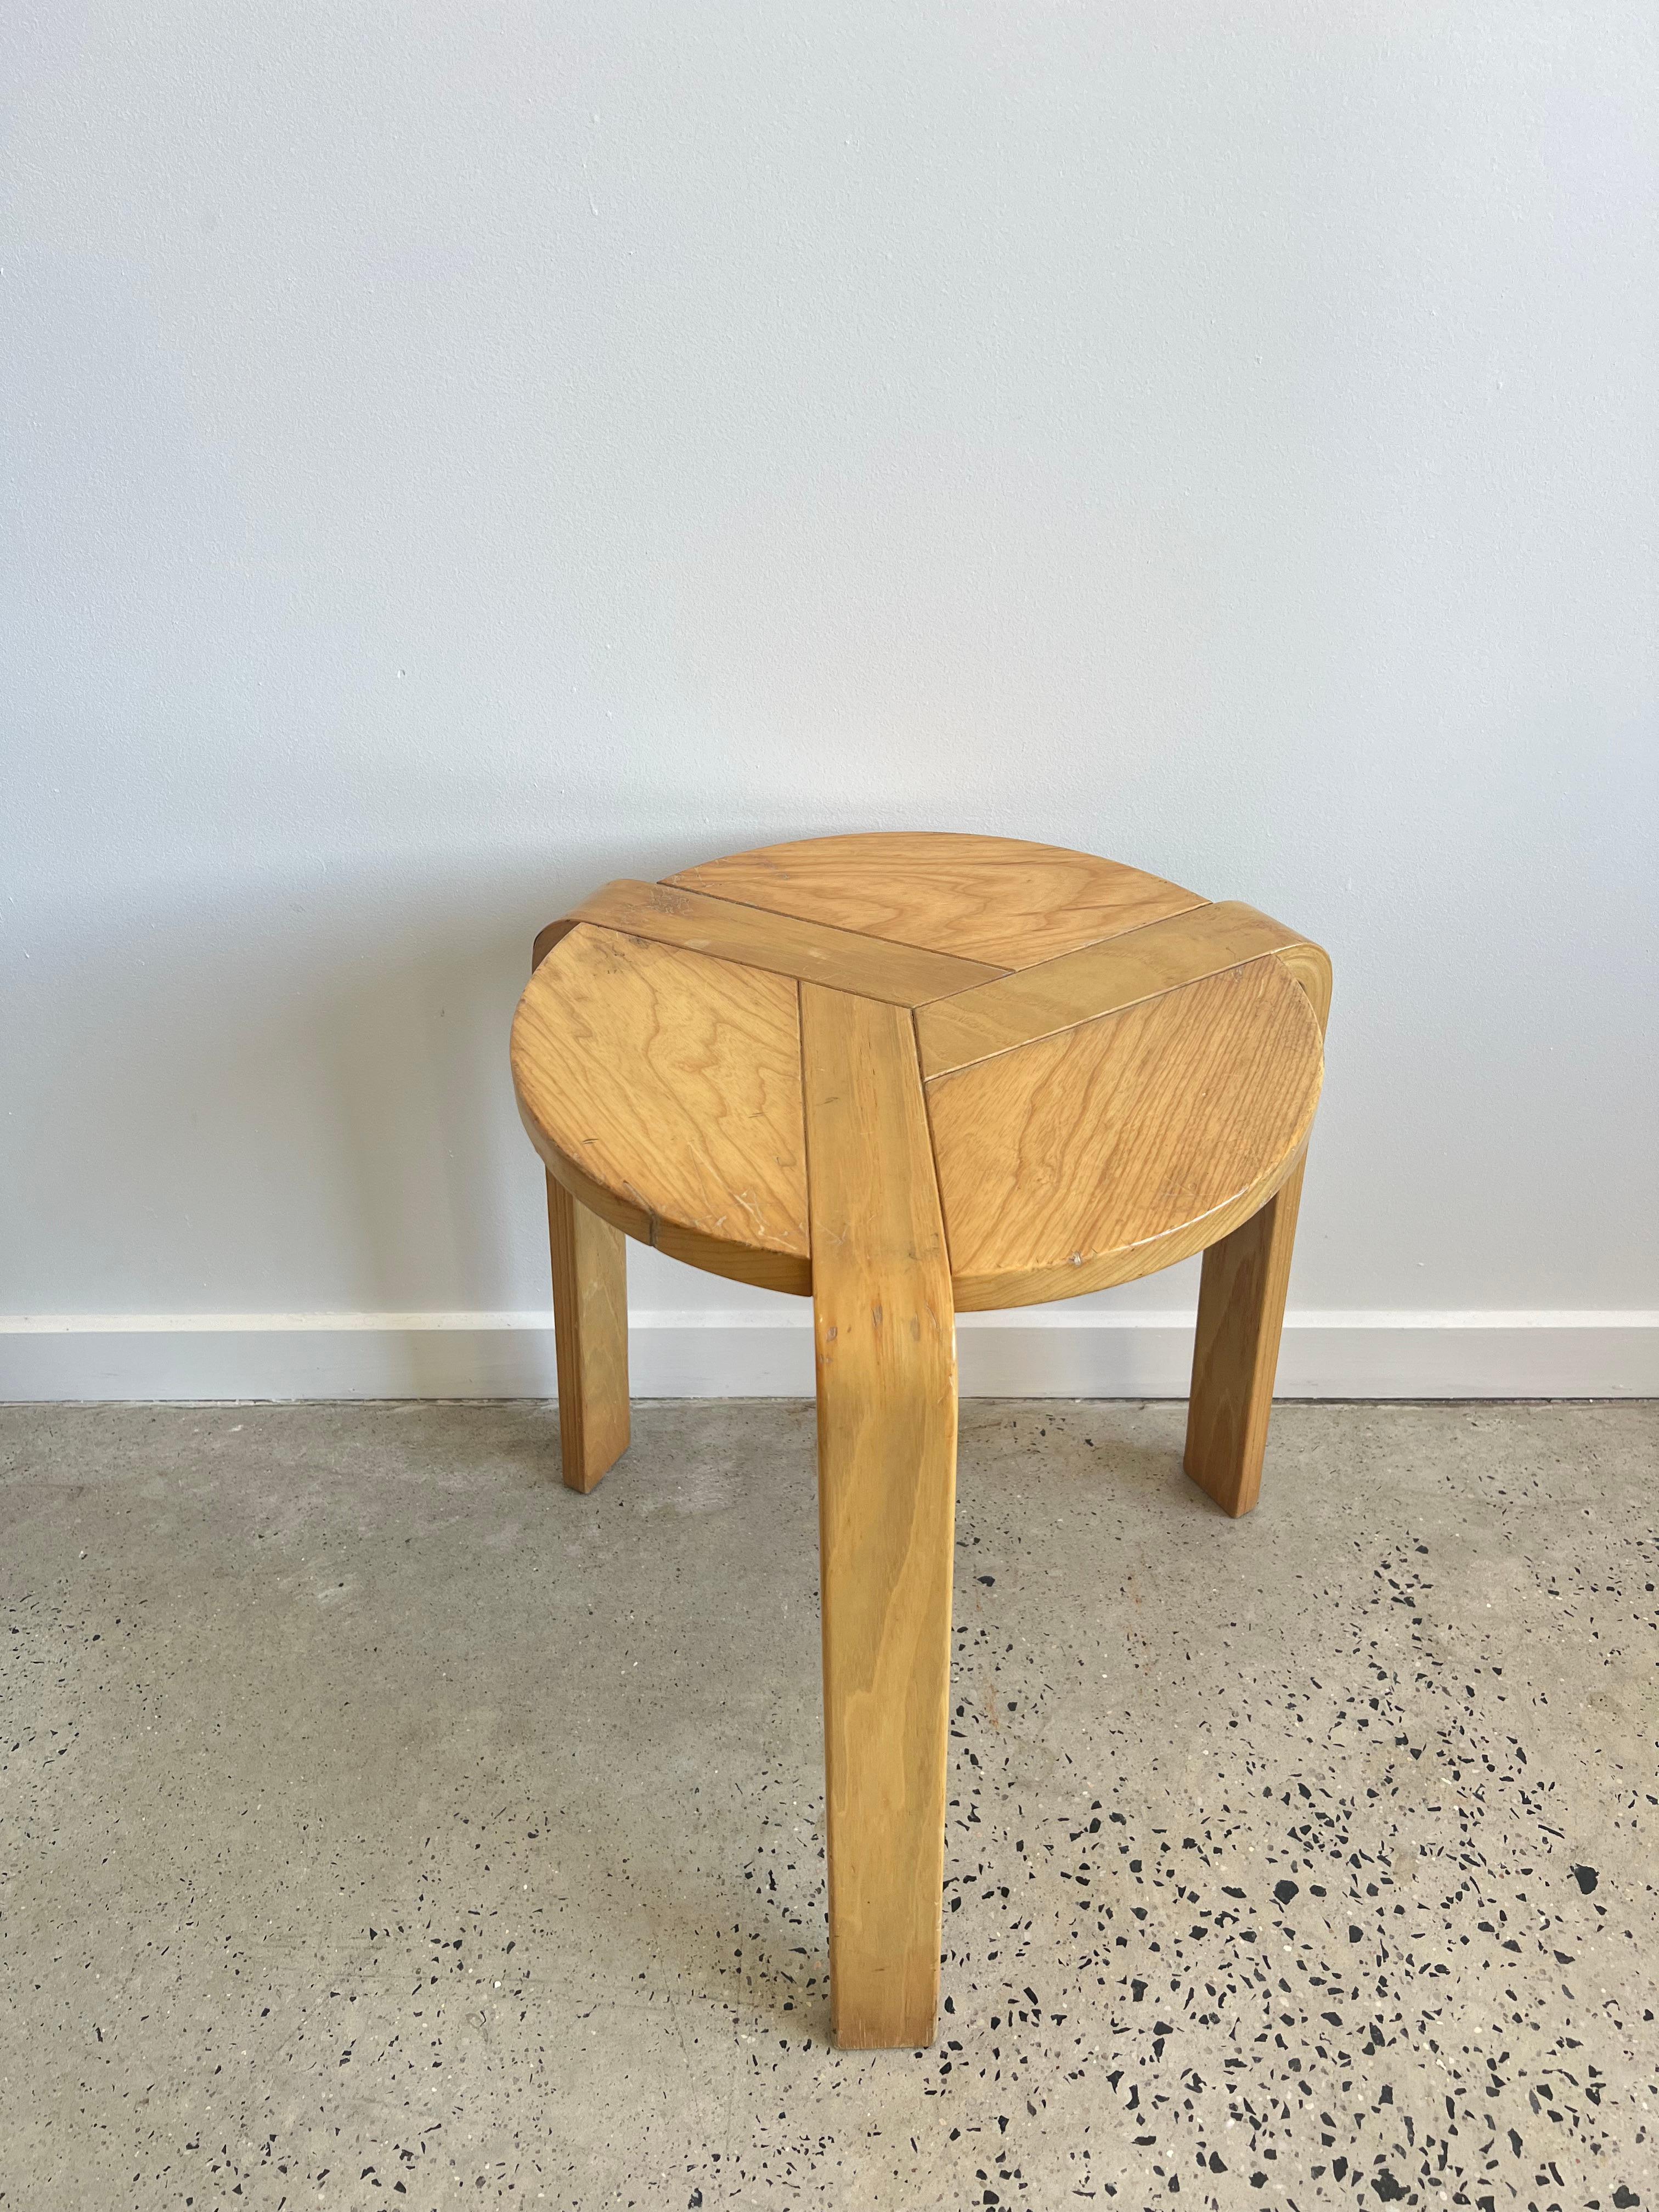 Hand-Carved Mid-Century Modern Italian Wood Stool by A.Simoni & G. Del Piero for Olive S.R.L For Sale